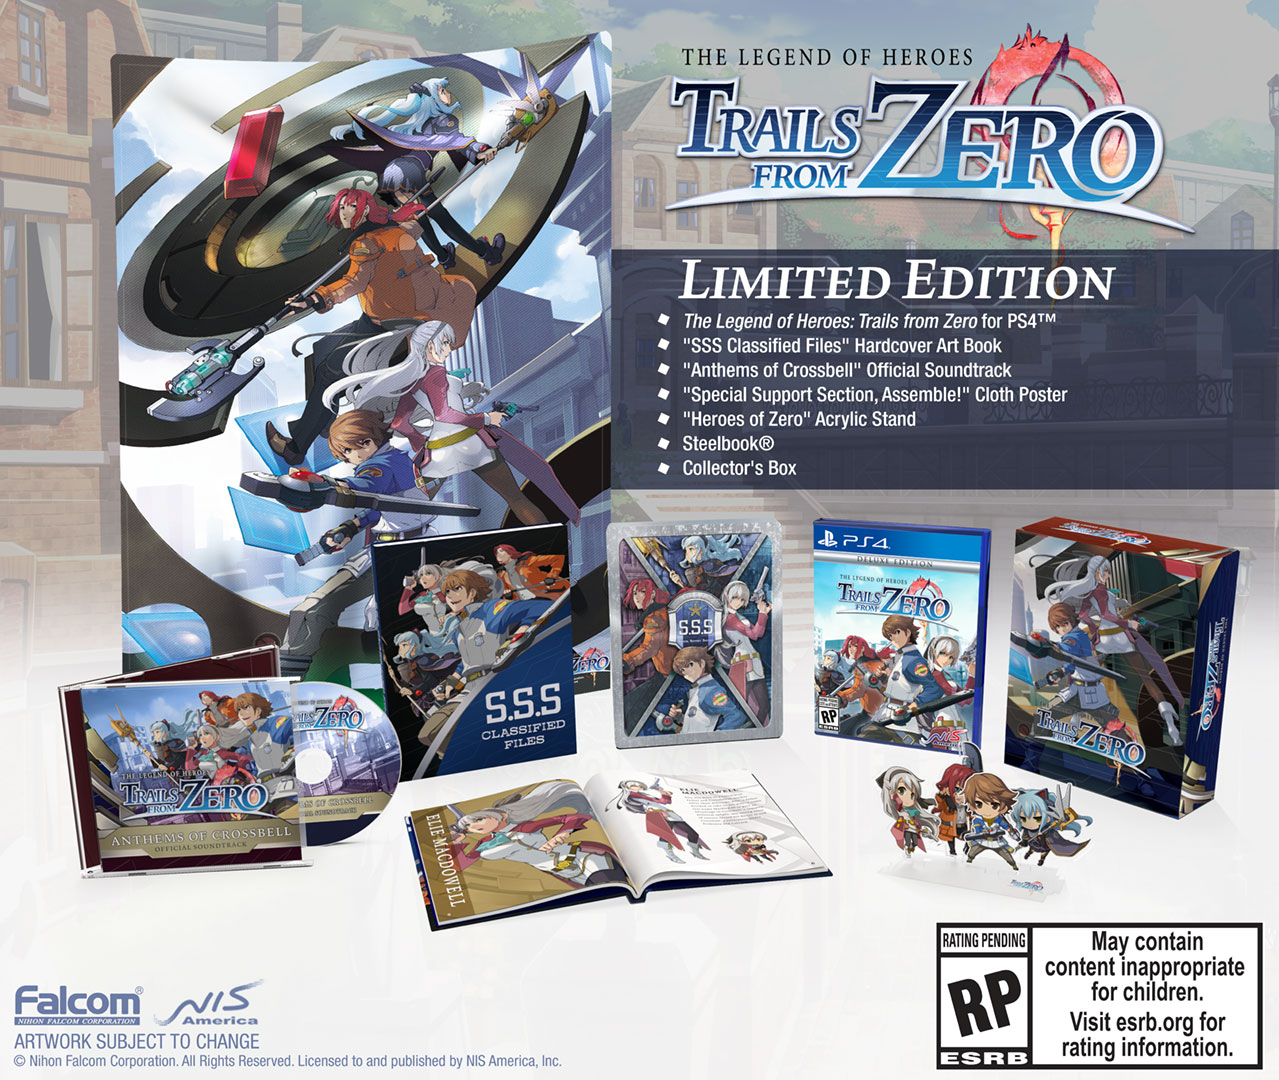 The Legend of Heroes - Trails from Zero Limited Edition